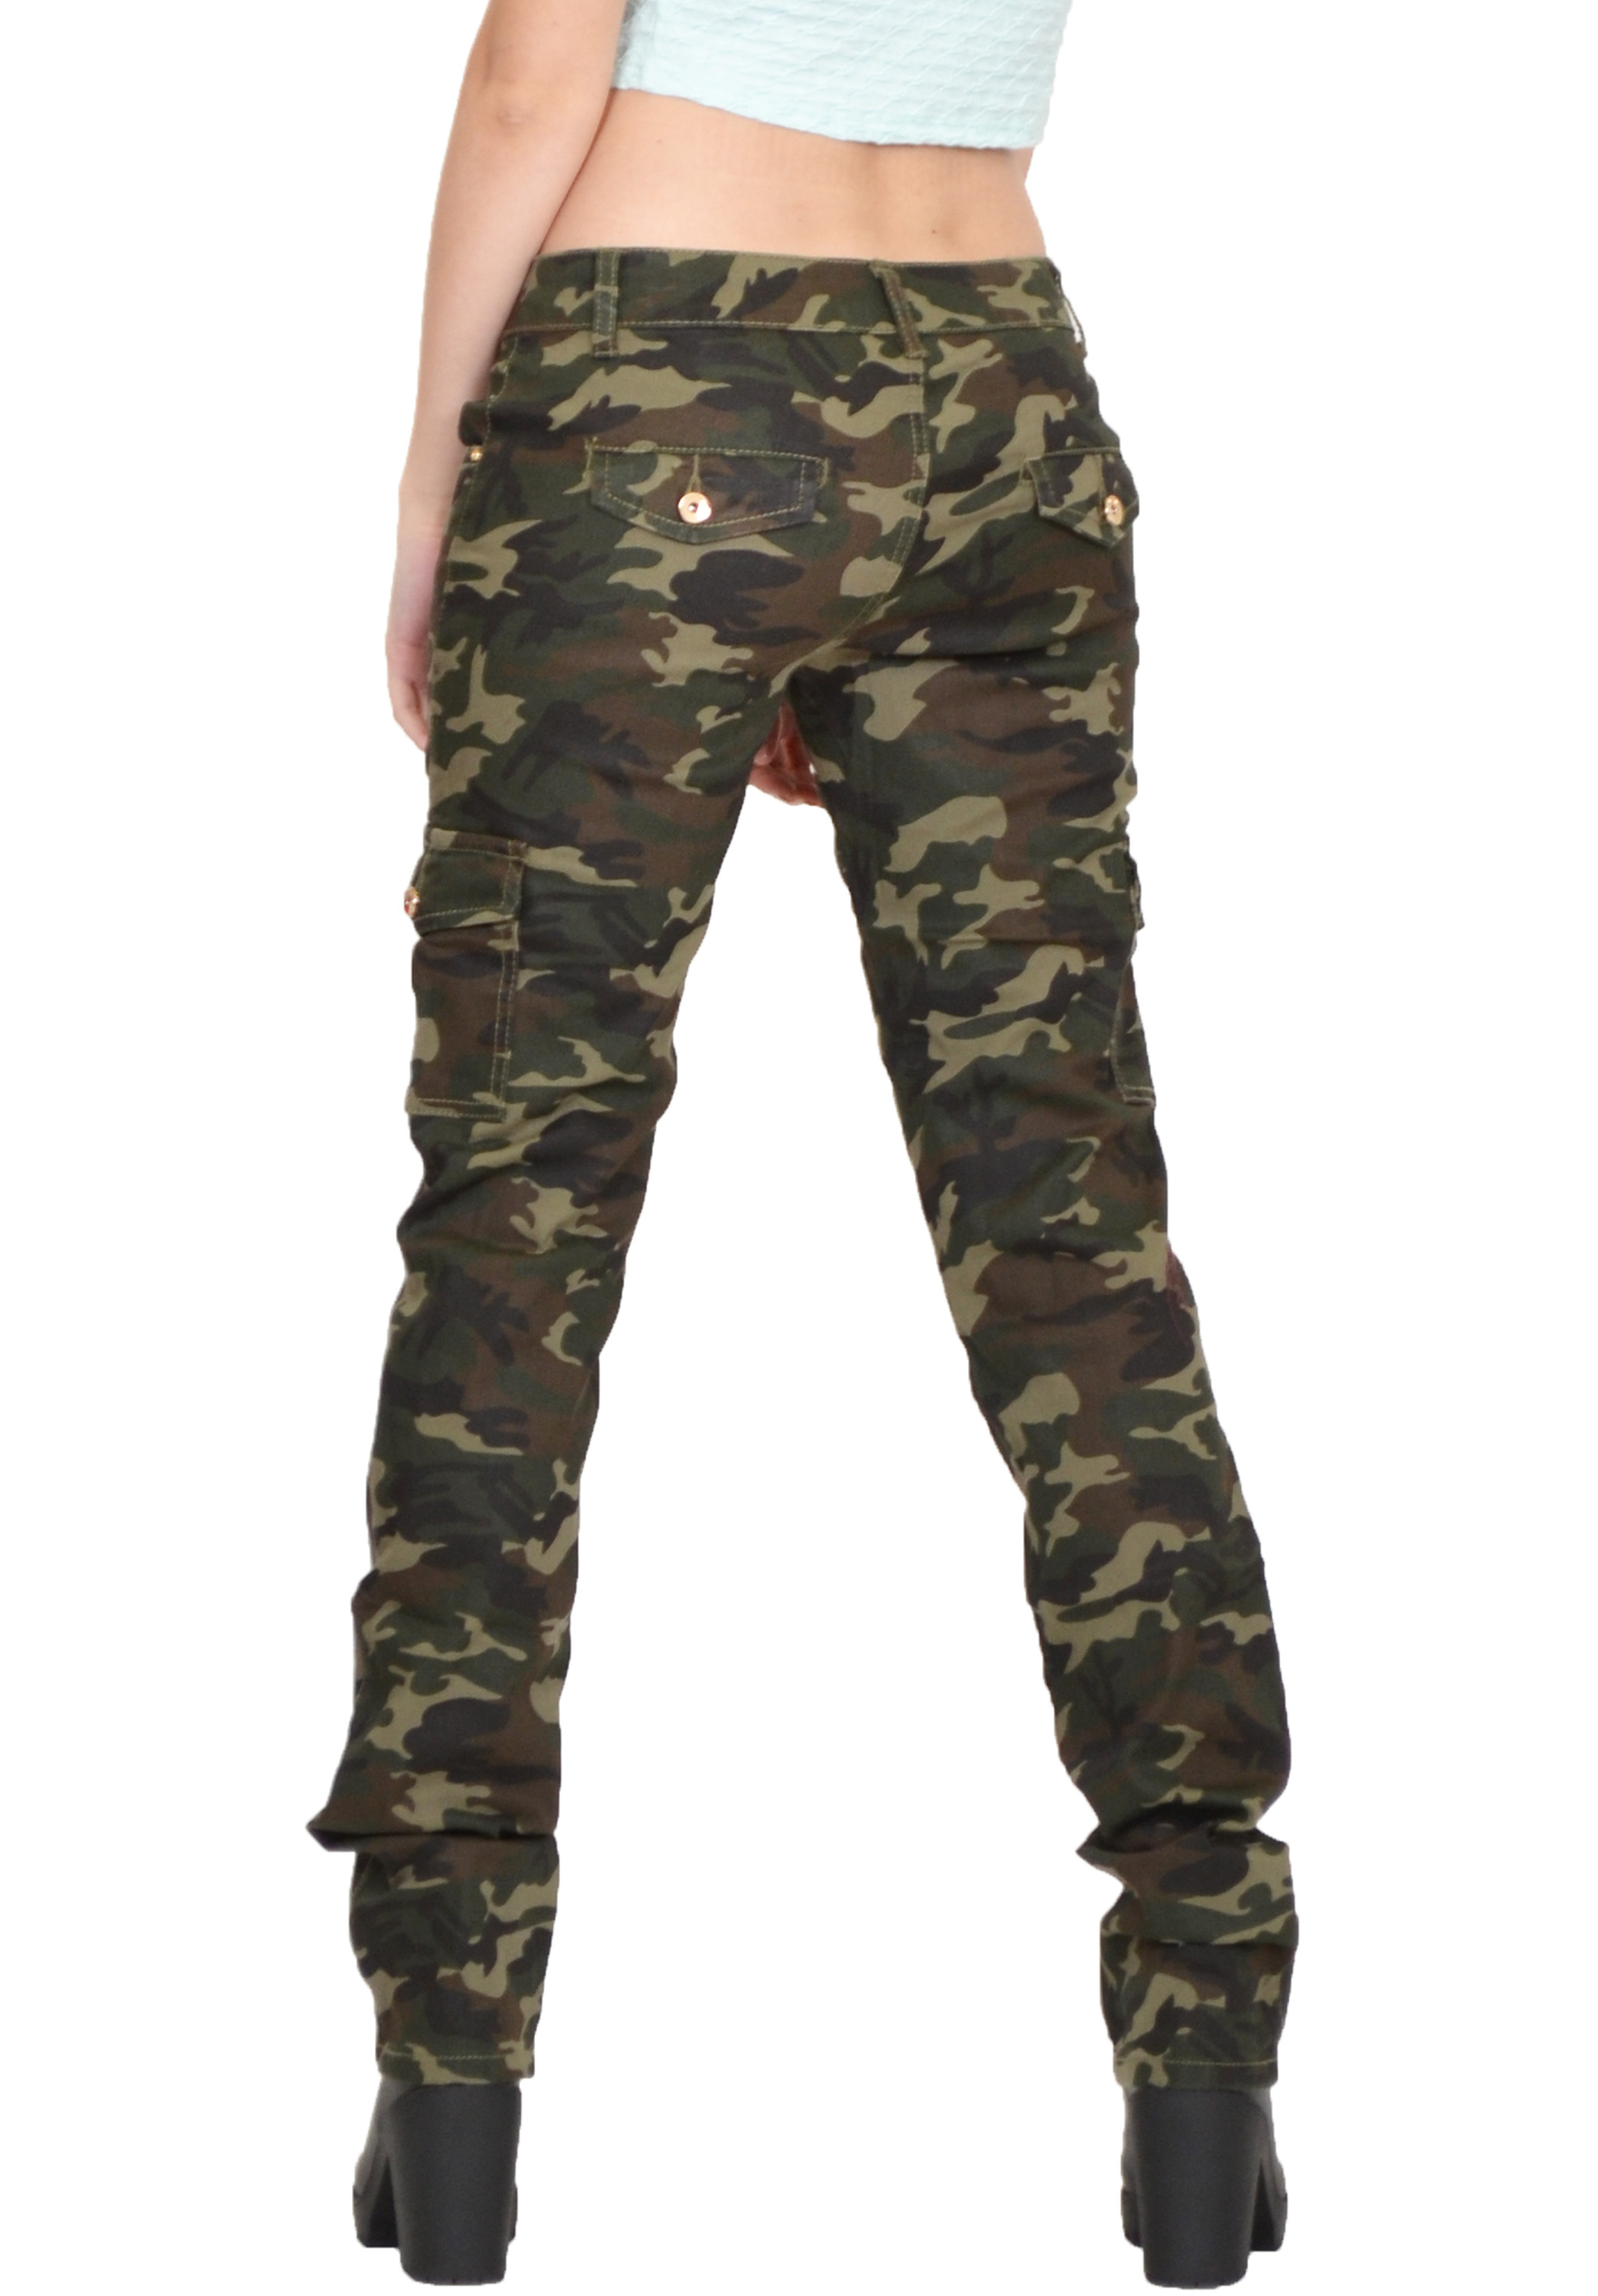 Womens Army Military Green Camouflage Slim Fit Combat Trousers Cargo ...